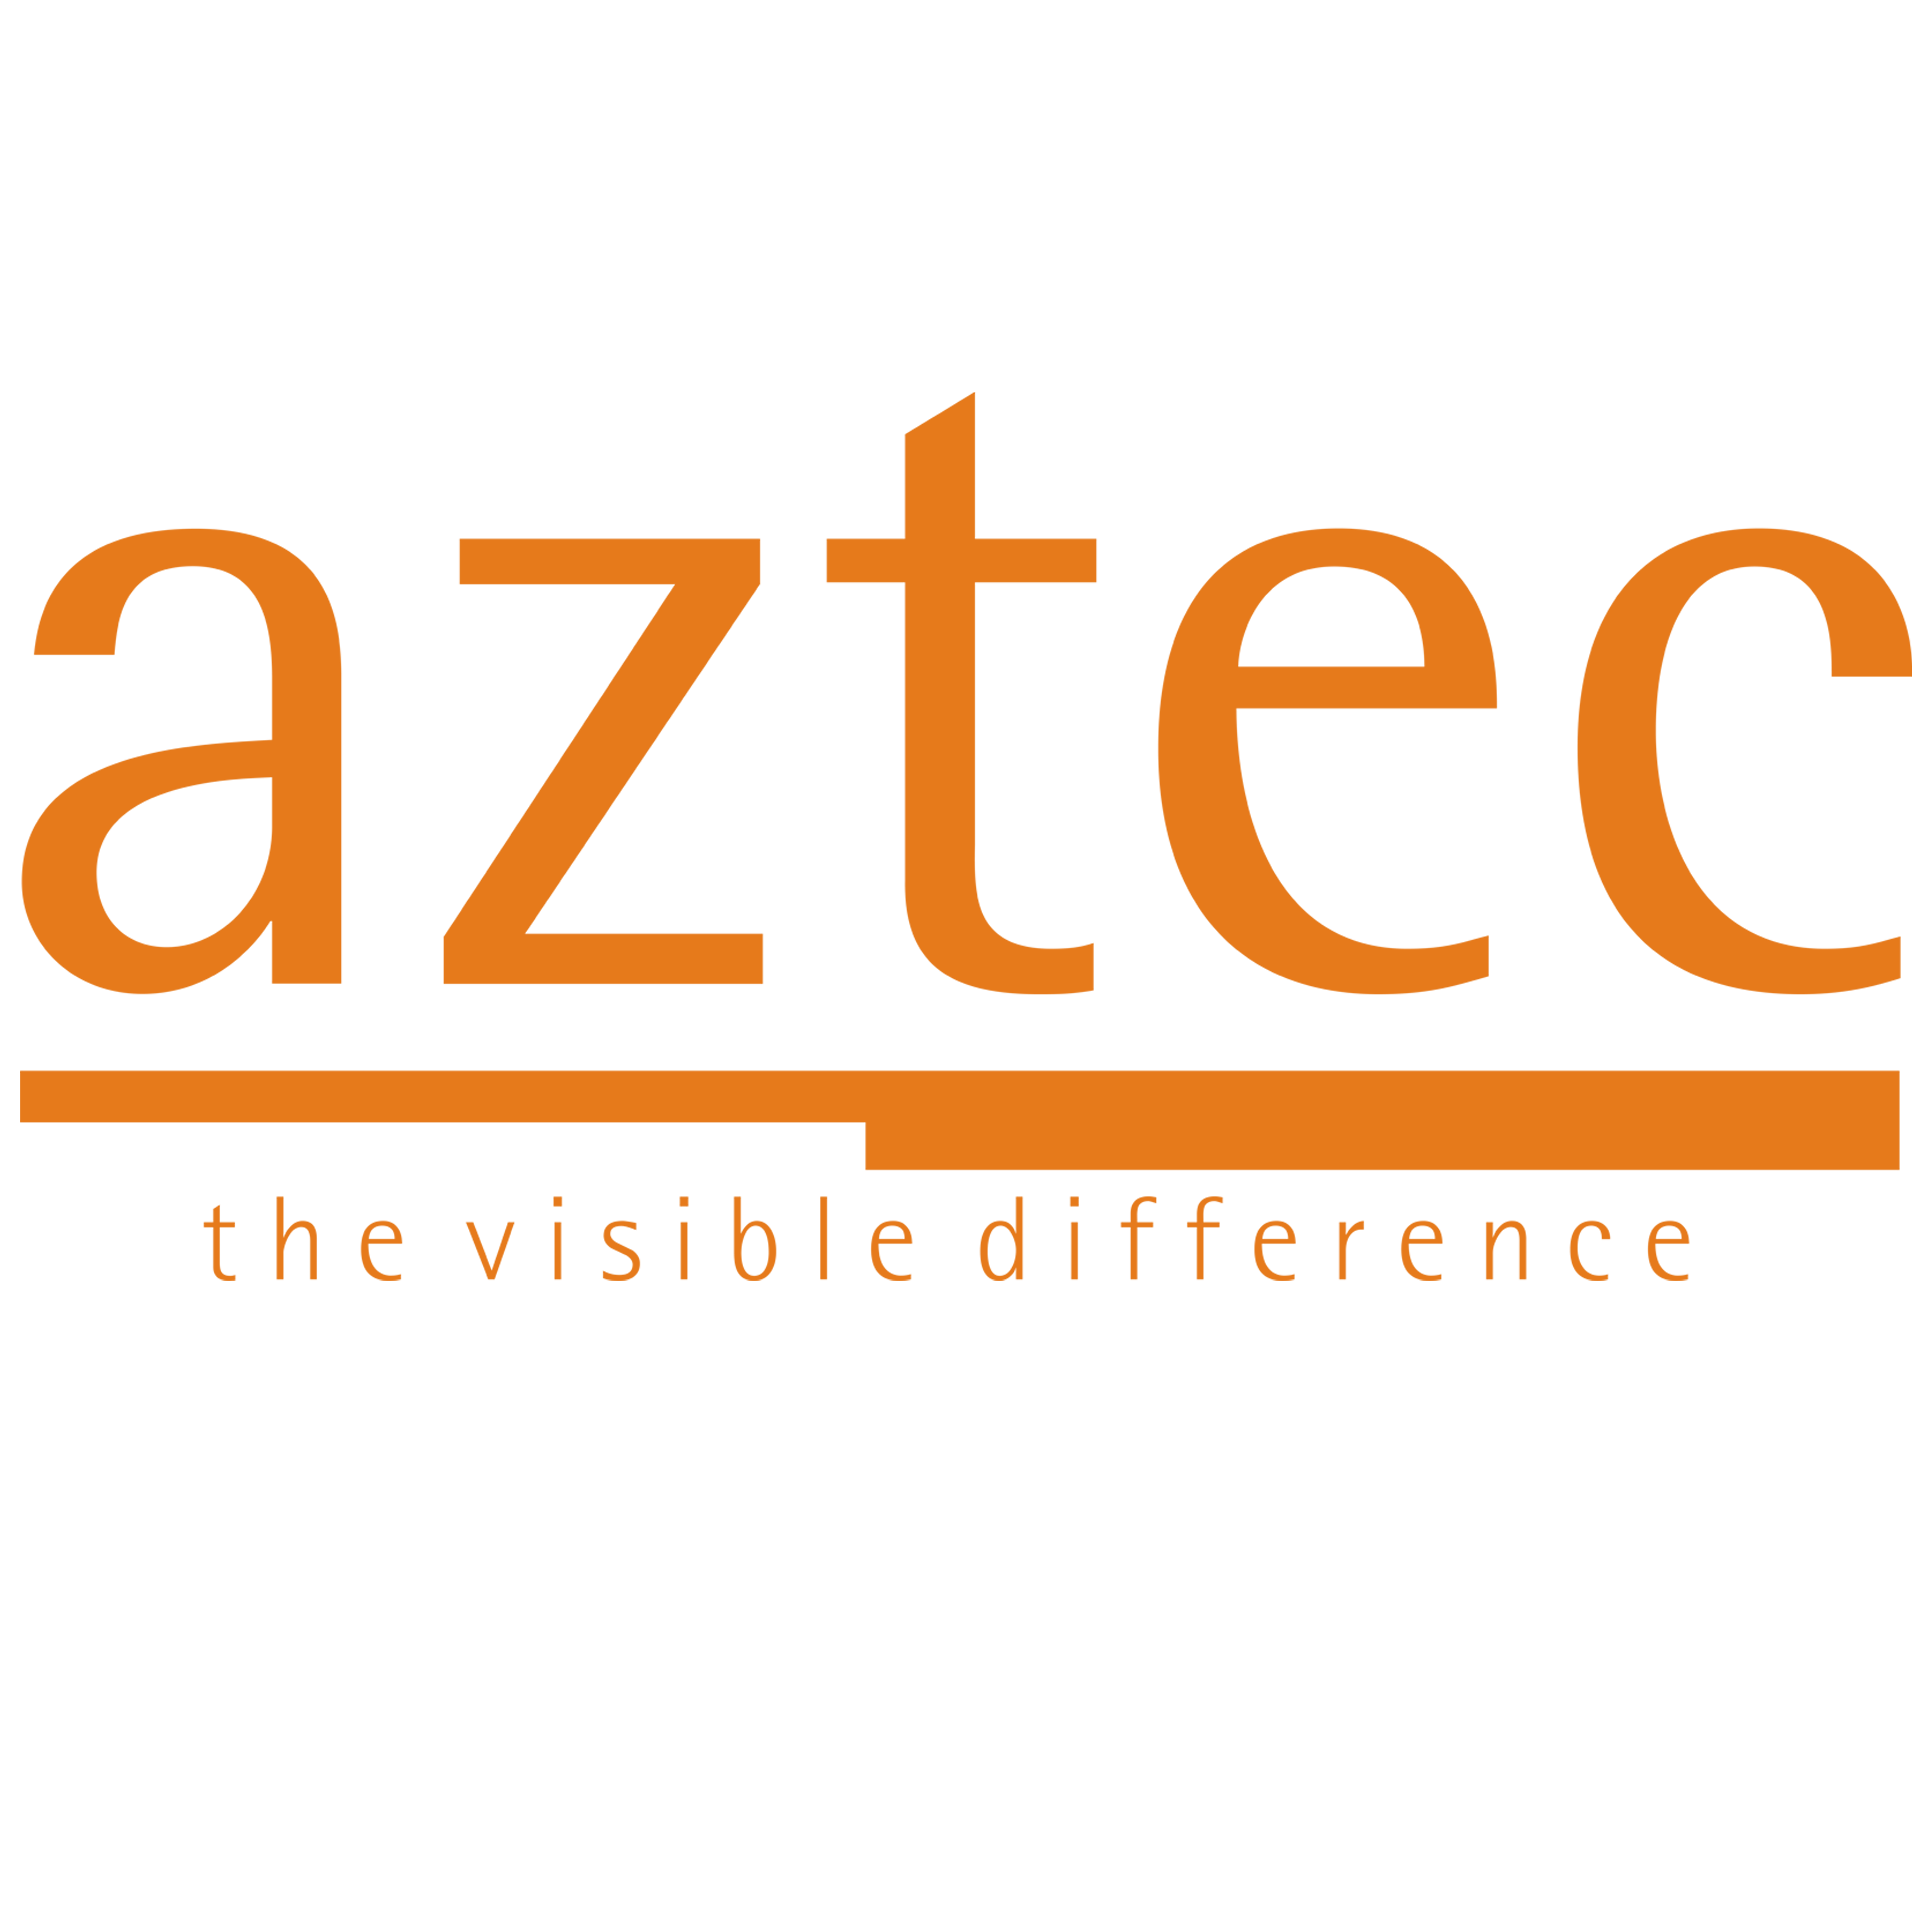 Aztec Event Services <a href="/product-introduction/hiretrack-nx/">review of HireTrack NX</a>